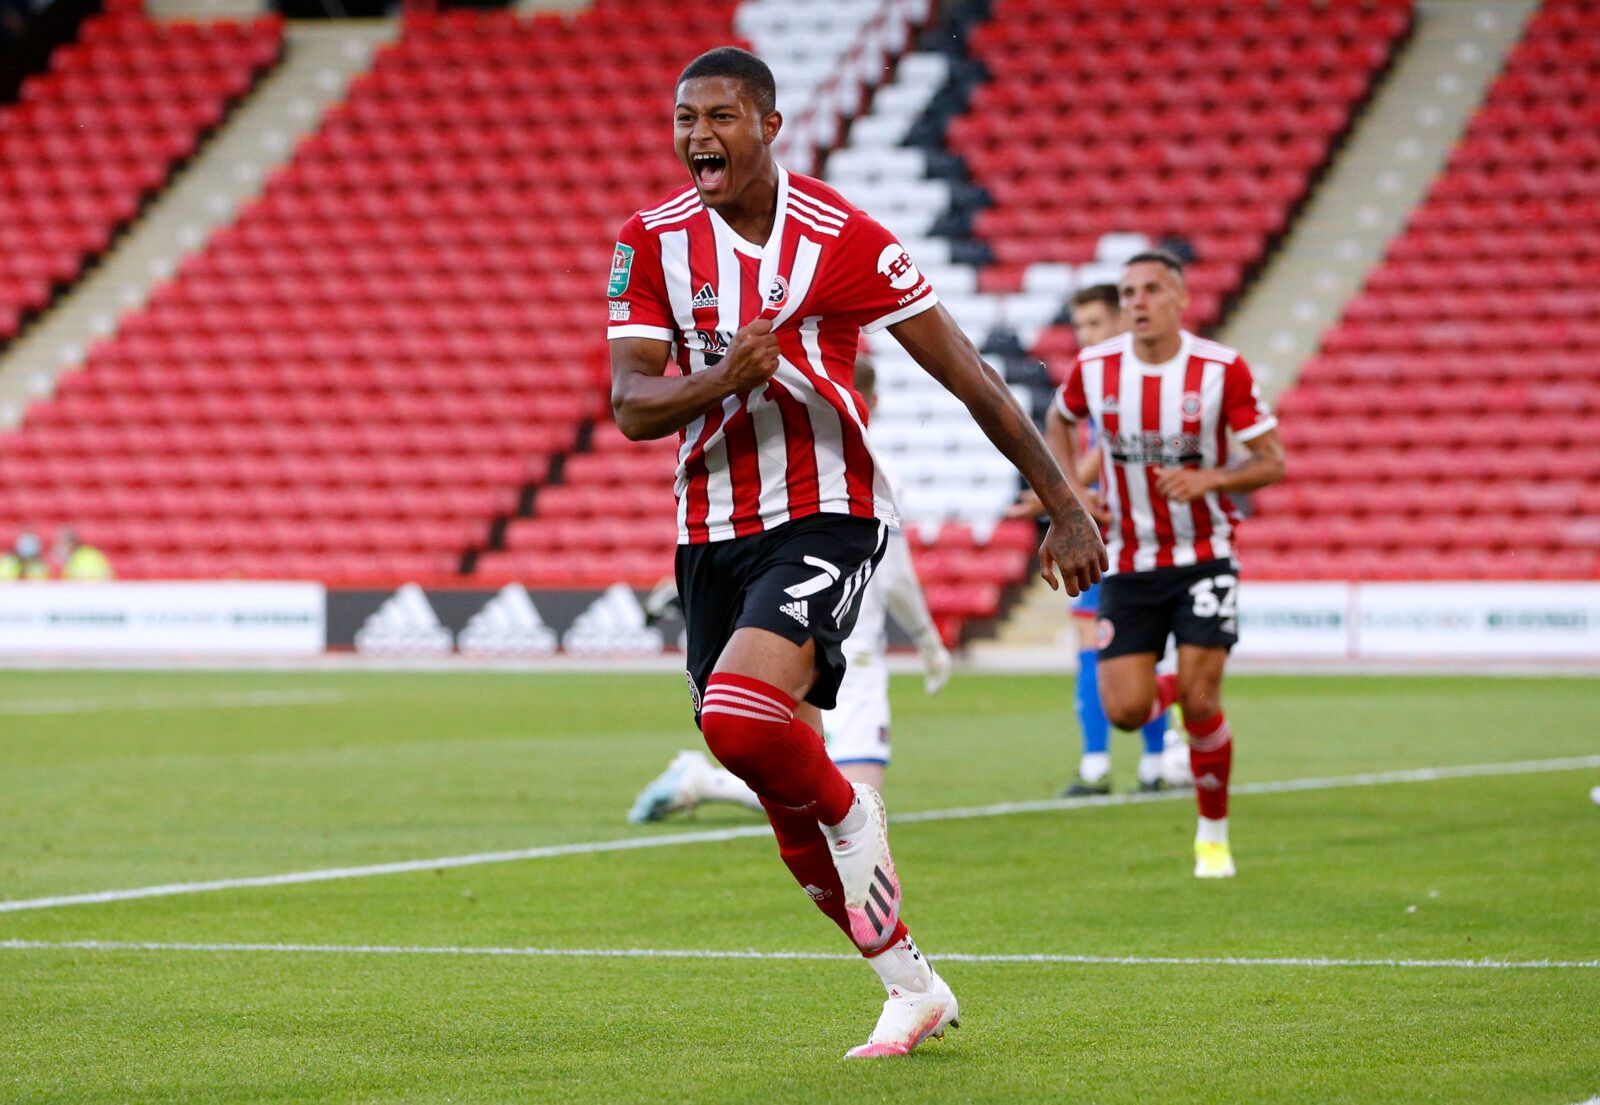 Soccer Football - Carabao Cup - First Round - Sheffield United v Carlisle United - Bramall Lane, Sheffield, Britain - August 10, 2021 Sheffield United's Rhian Brewster celebrates scoring their first goal Action Images/Ed Sykes EDITORIAL USE ONLY. No use with unauthorized audio, video, data, fixture lists, club/league logos or 'live' services. Online in-match use limited to 75 images, no video emulation. No use in betting, games or single club /league/player publications.  Please contact your acc